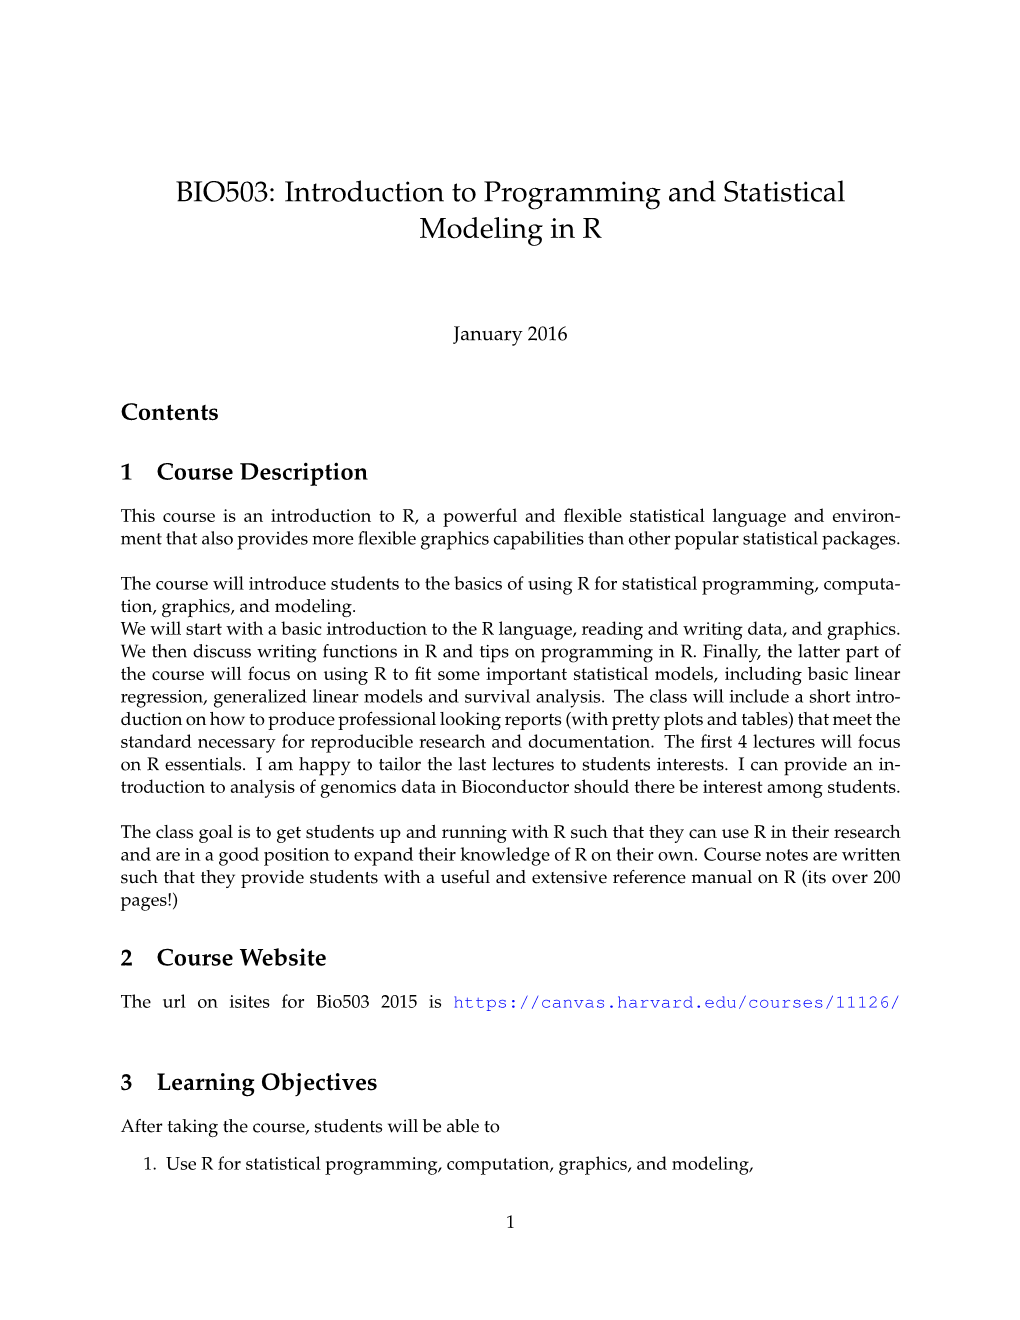 Introduction to Programming and Statistical Modeling in R